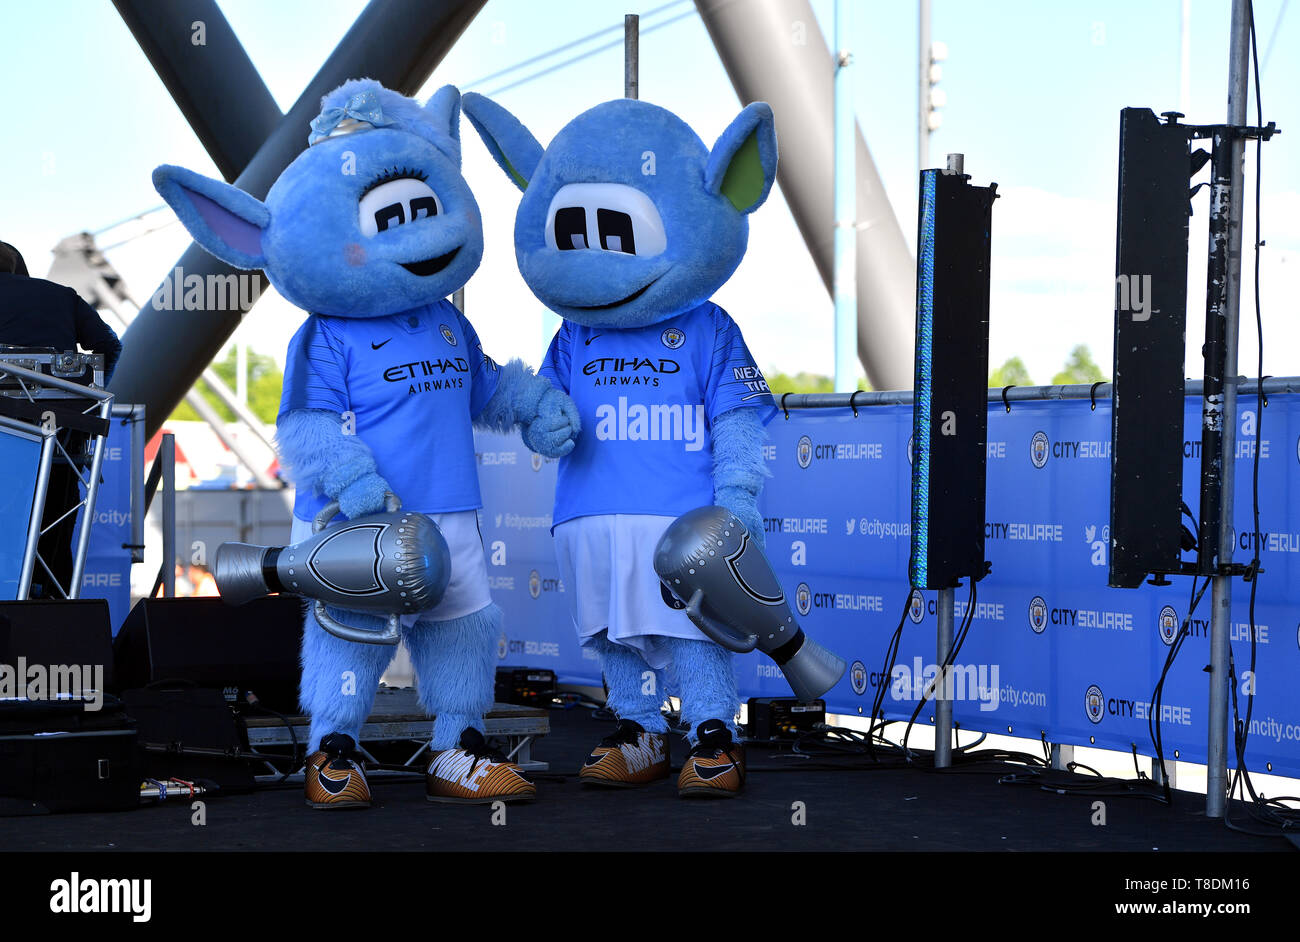 Manchester City mascots Moonchester and Moonbeam at the Etihad Stadium, Manchester. Stock Photo